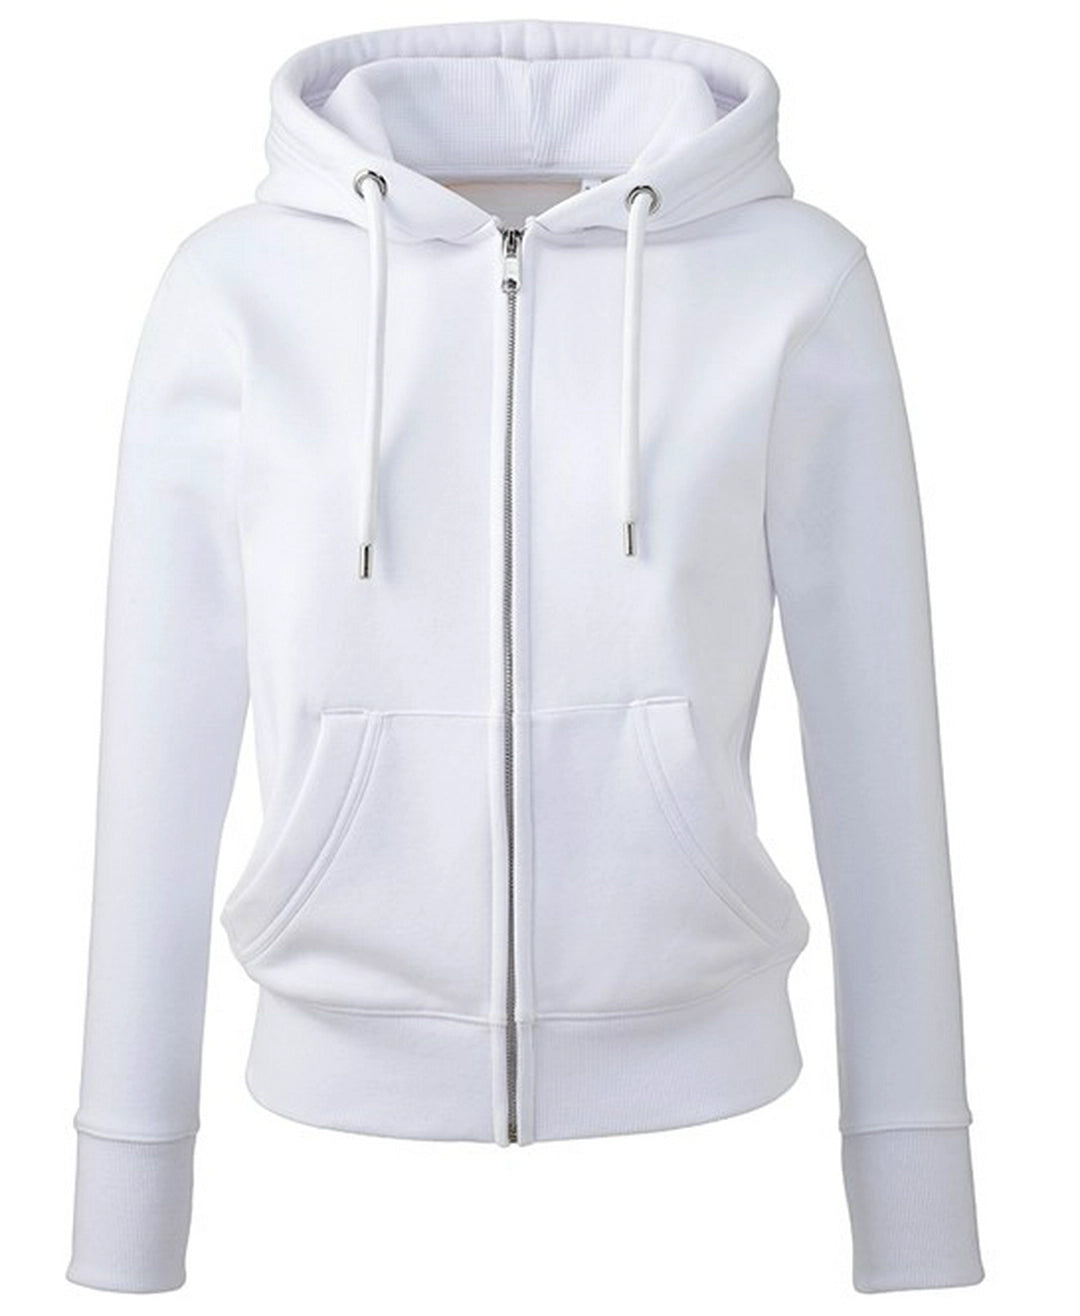 ANTHEM AM004 Women's Anthem full-zip hoodie Peached fabric soft-feel finish Waffle knit hood High polished - COOZO